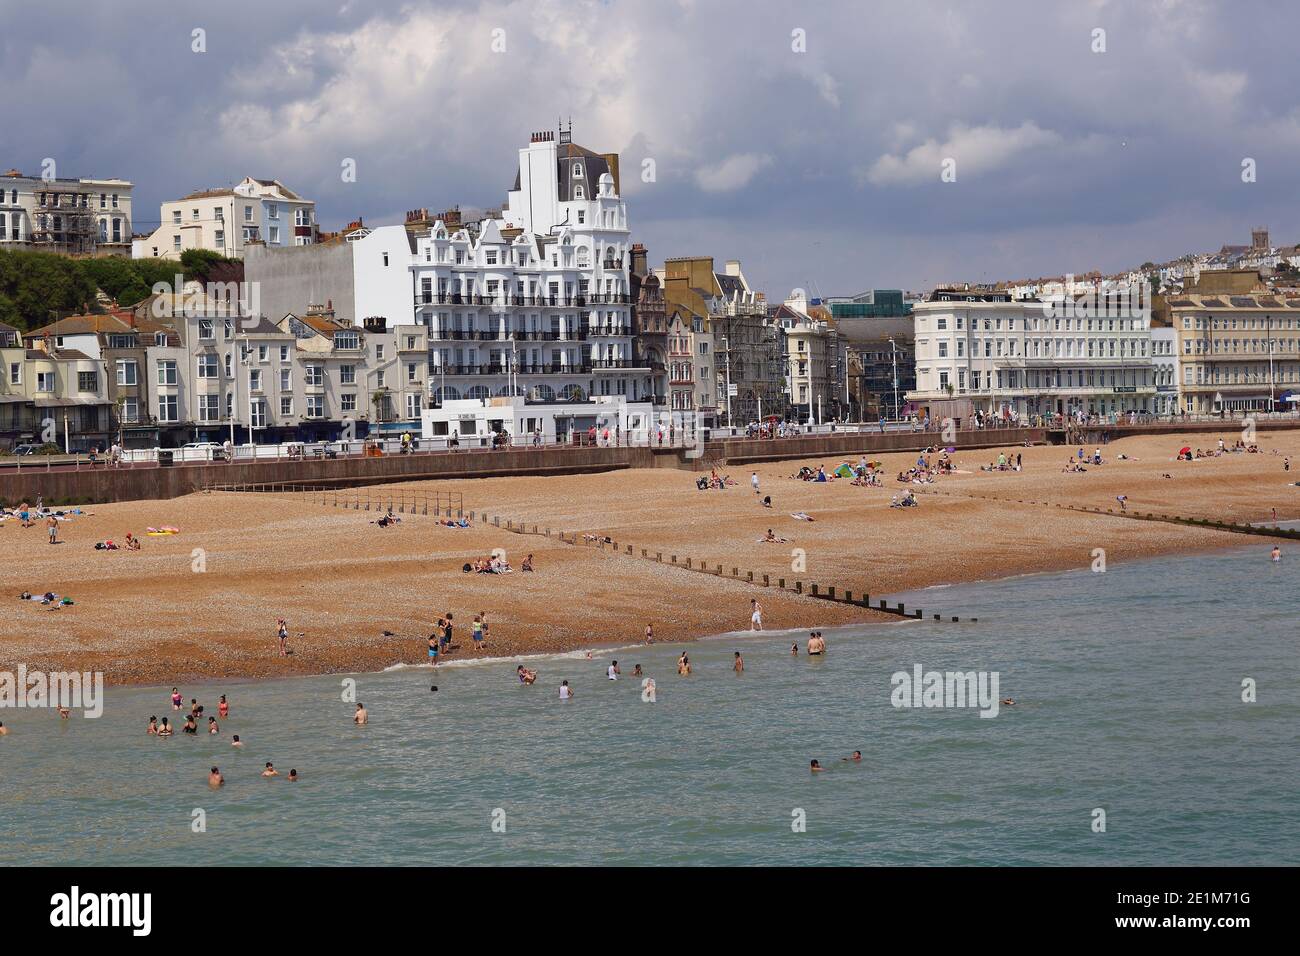 Hastings seafront and beach, east sussex, uk Stock Photo